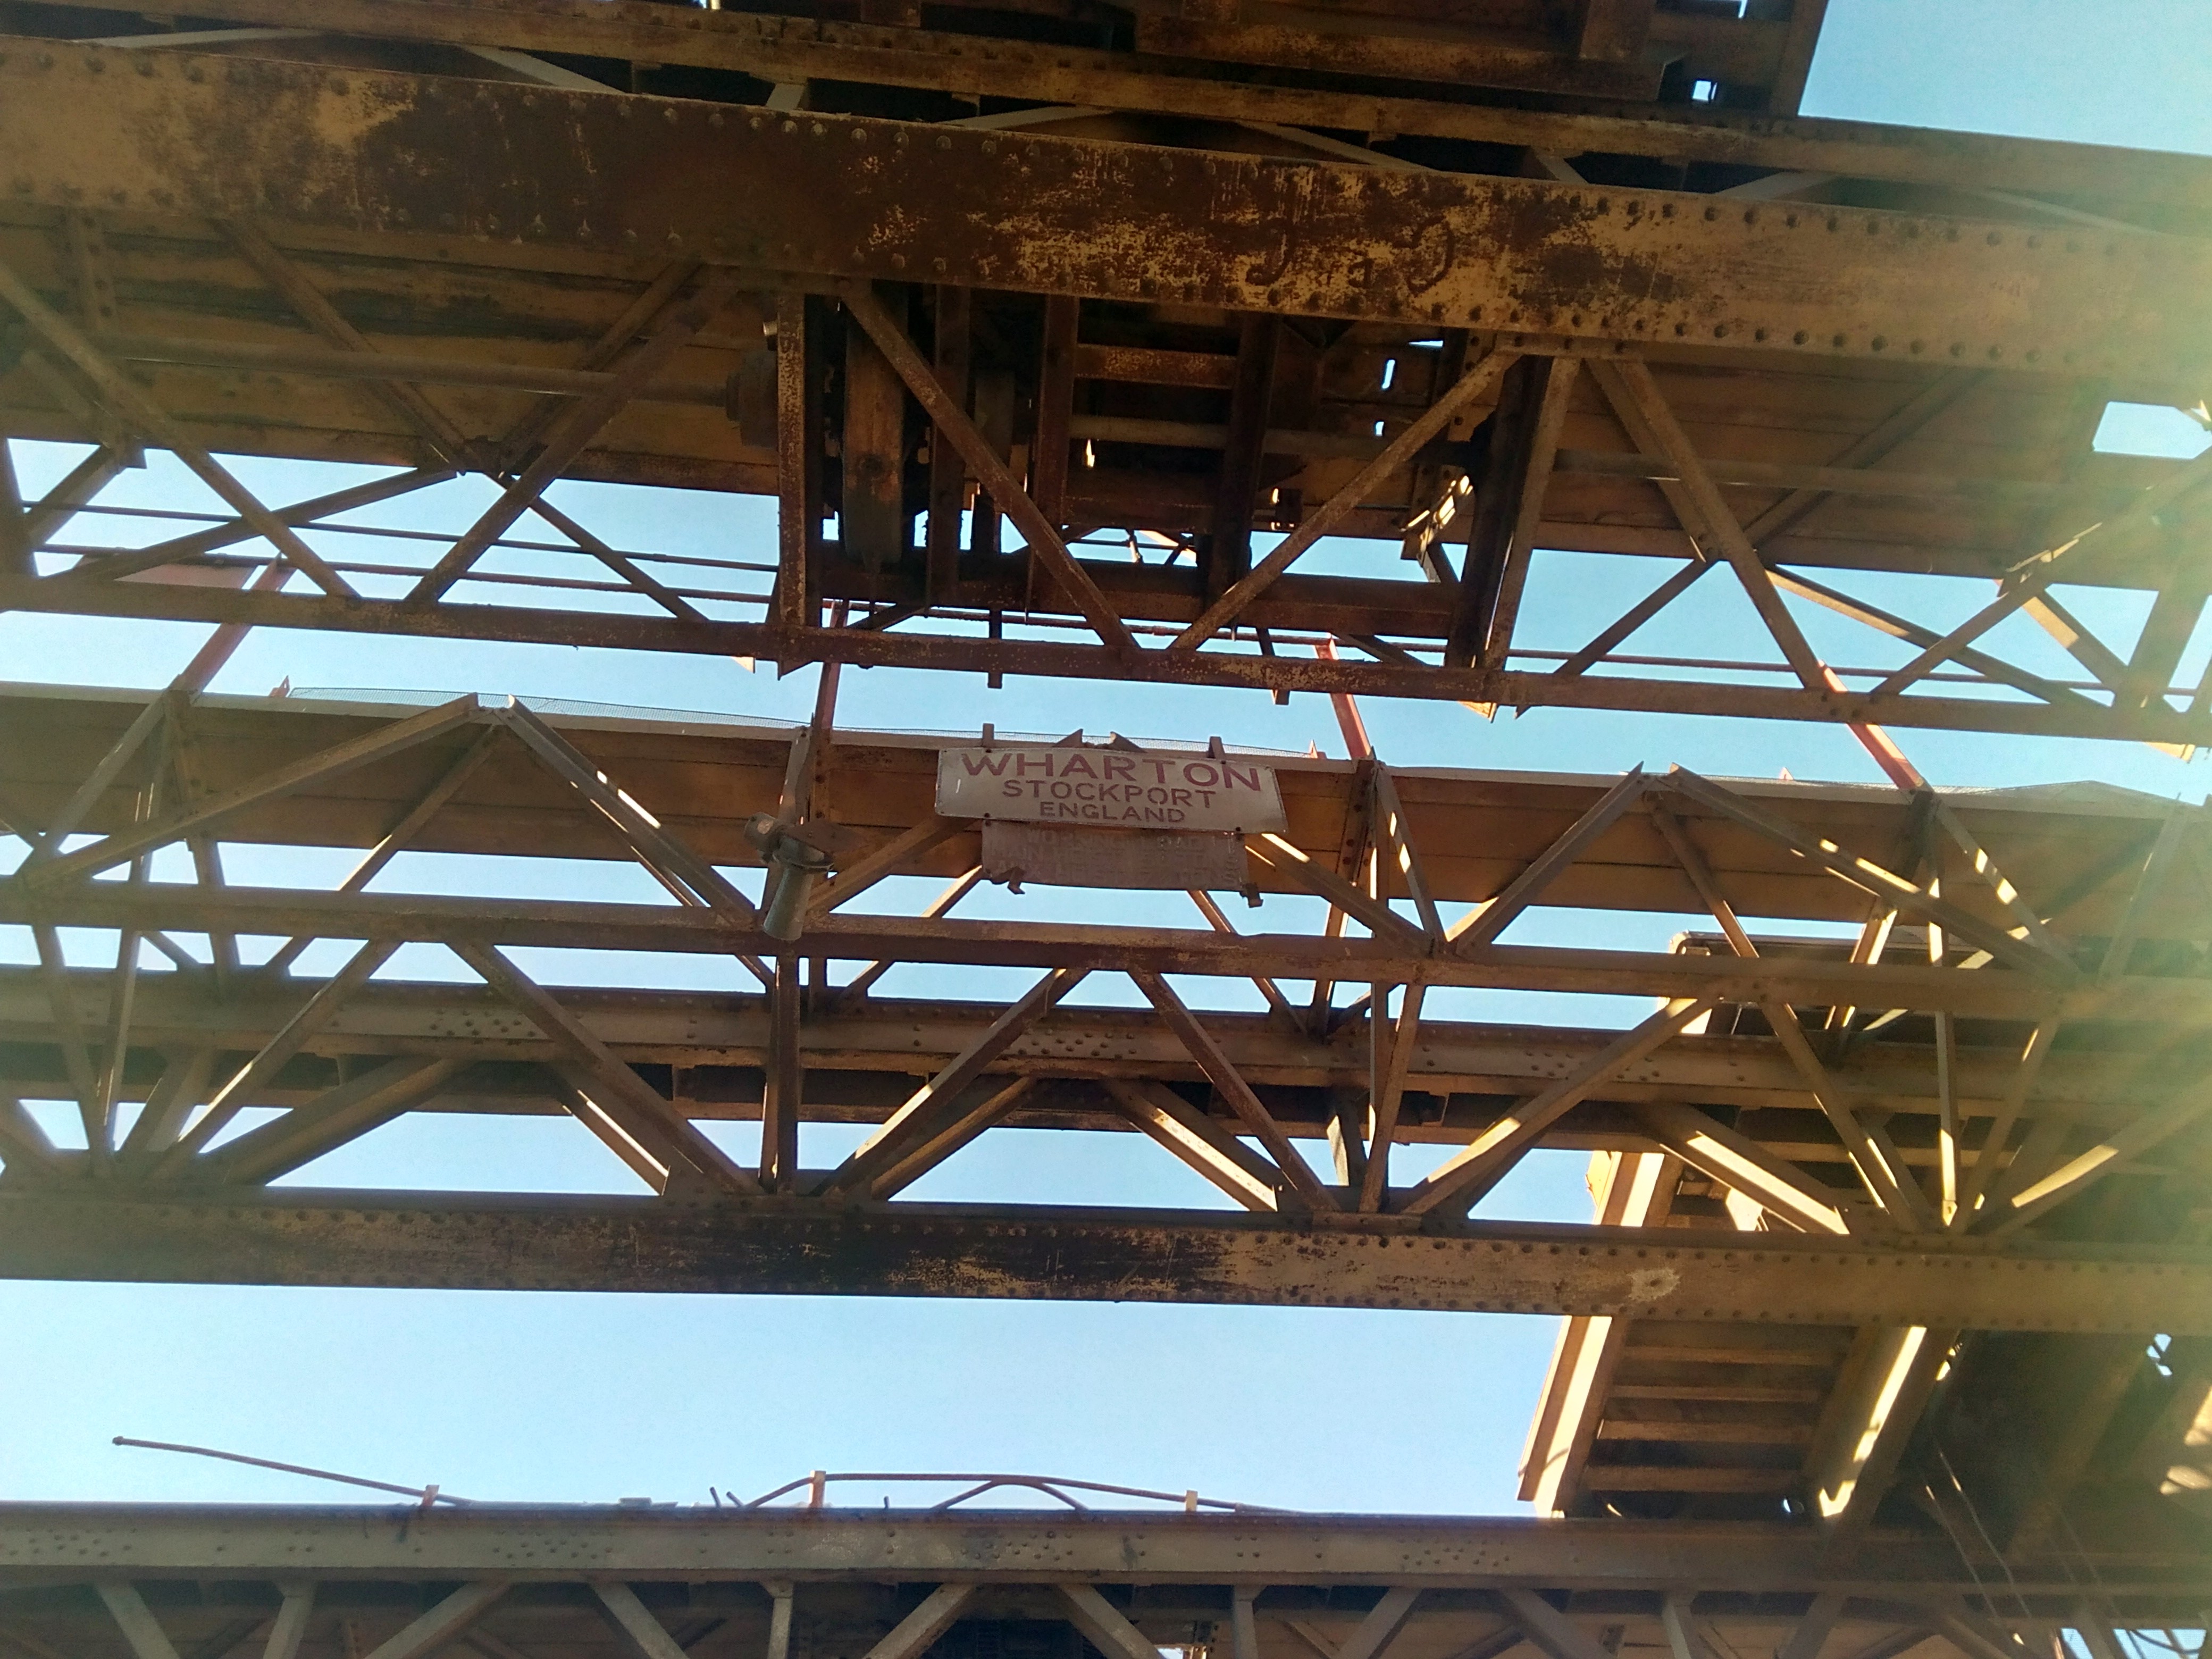 Photograph taken looking up at the underside of a pair of very
large overhead cranes. A large manufacturers' plate, reading 'Wharton,
Stockport, England' is visible; below that is a very faded rating
plate, reading 'Working Load, main hoist, Fifty tons. Aux hoist: Seven
and a half tons.